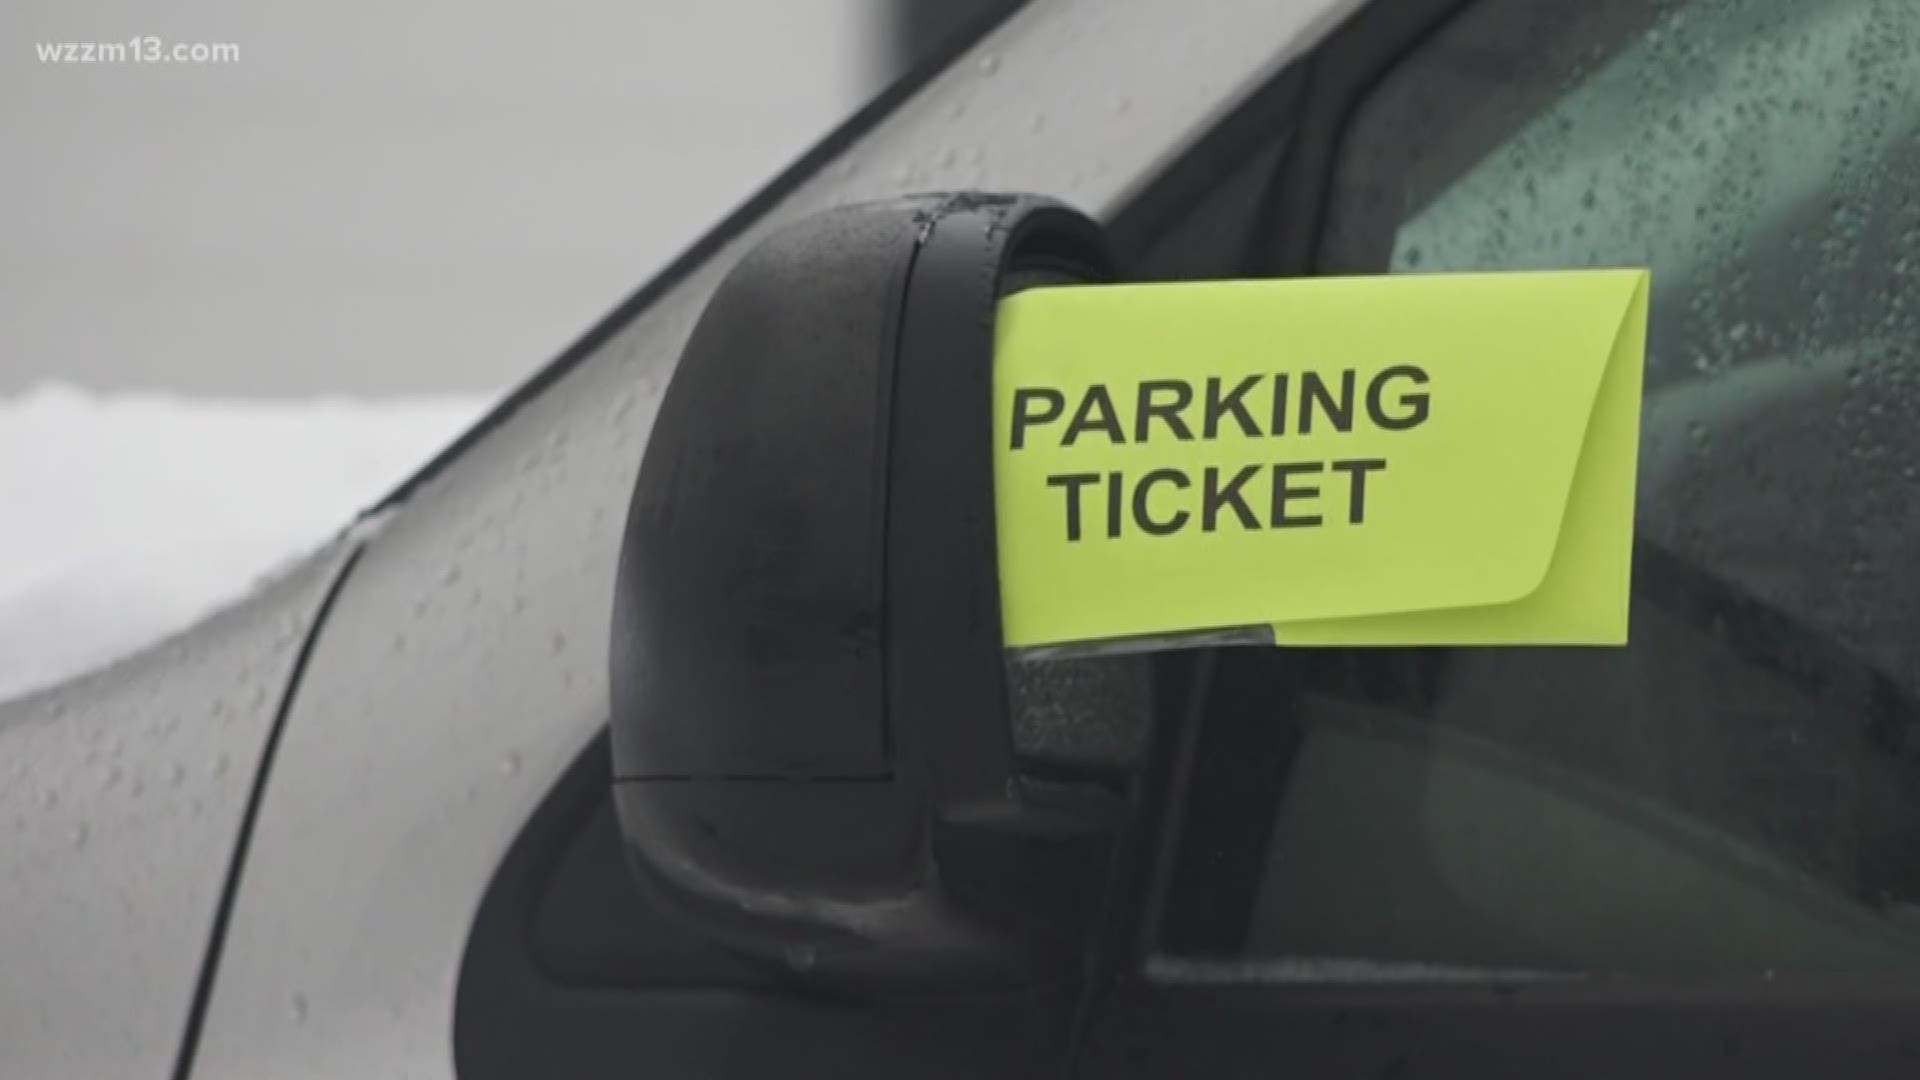 Grand Rapids Police issues higher number of odd-even parking tickets